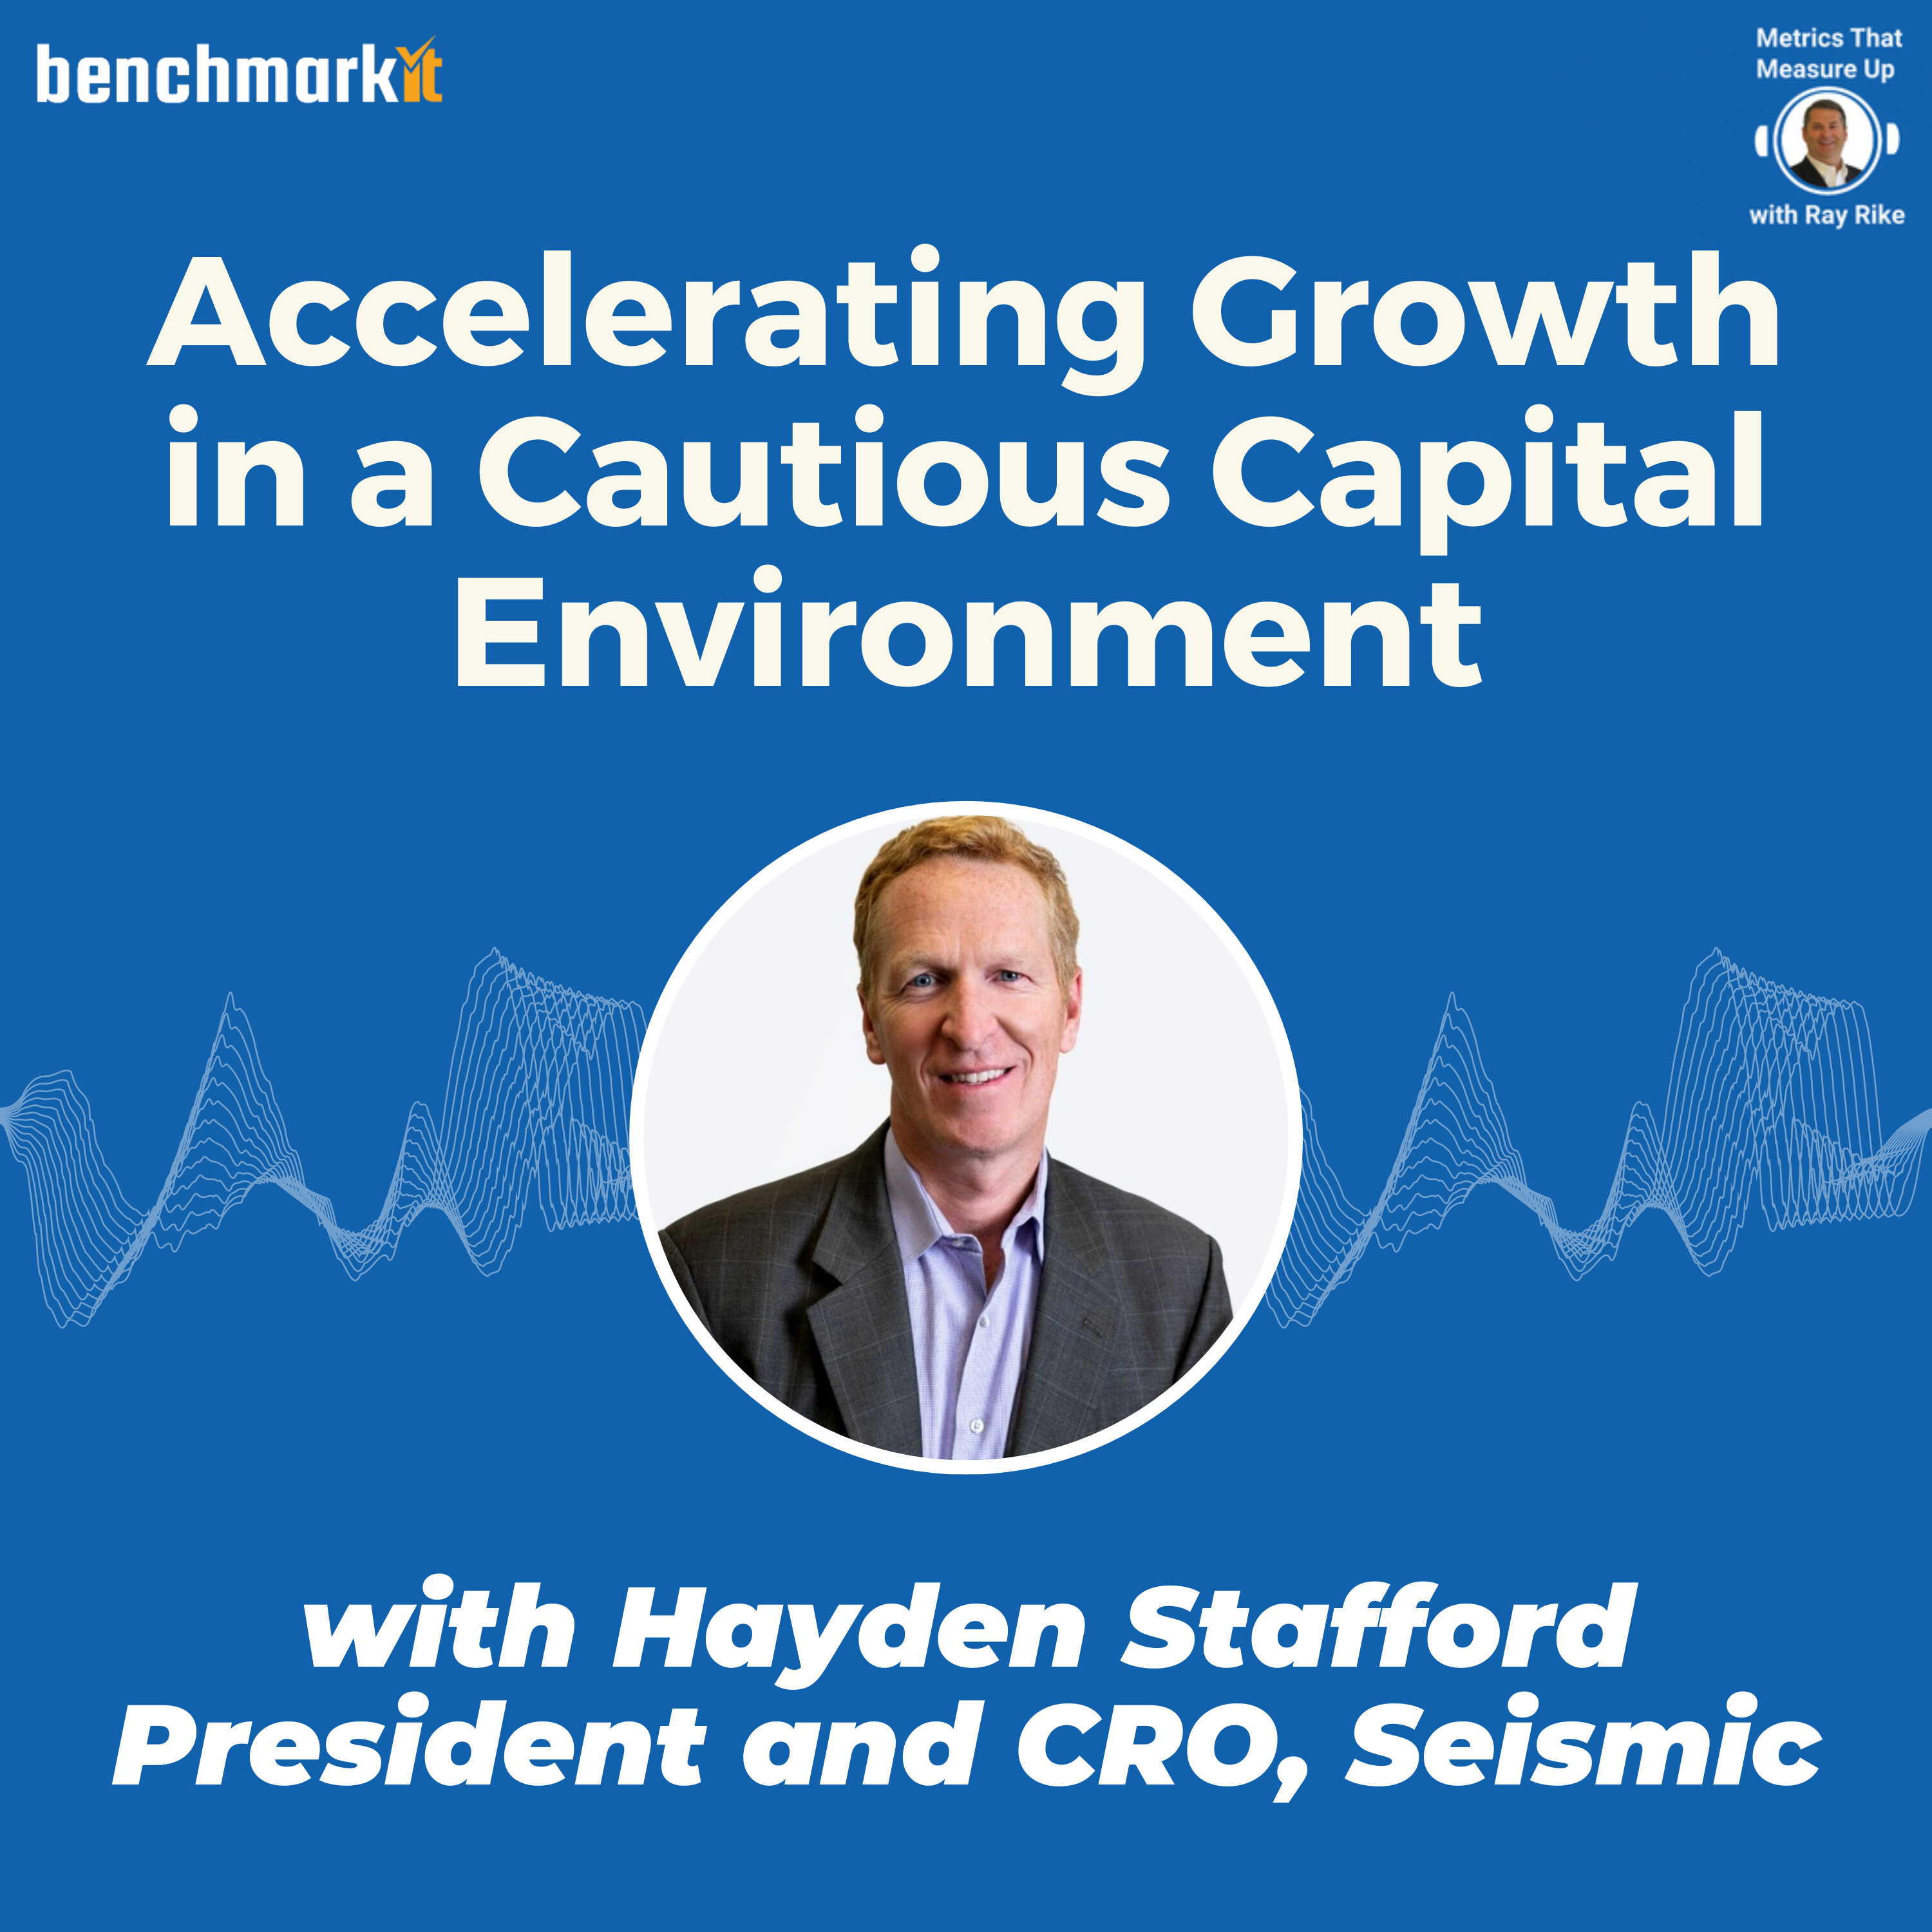 Accelerating Growth in a Cautious Capital Environment - with Hayden Stafford, President and CRO Seismic